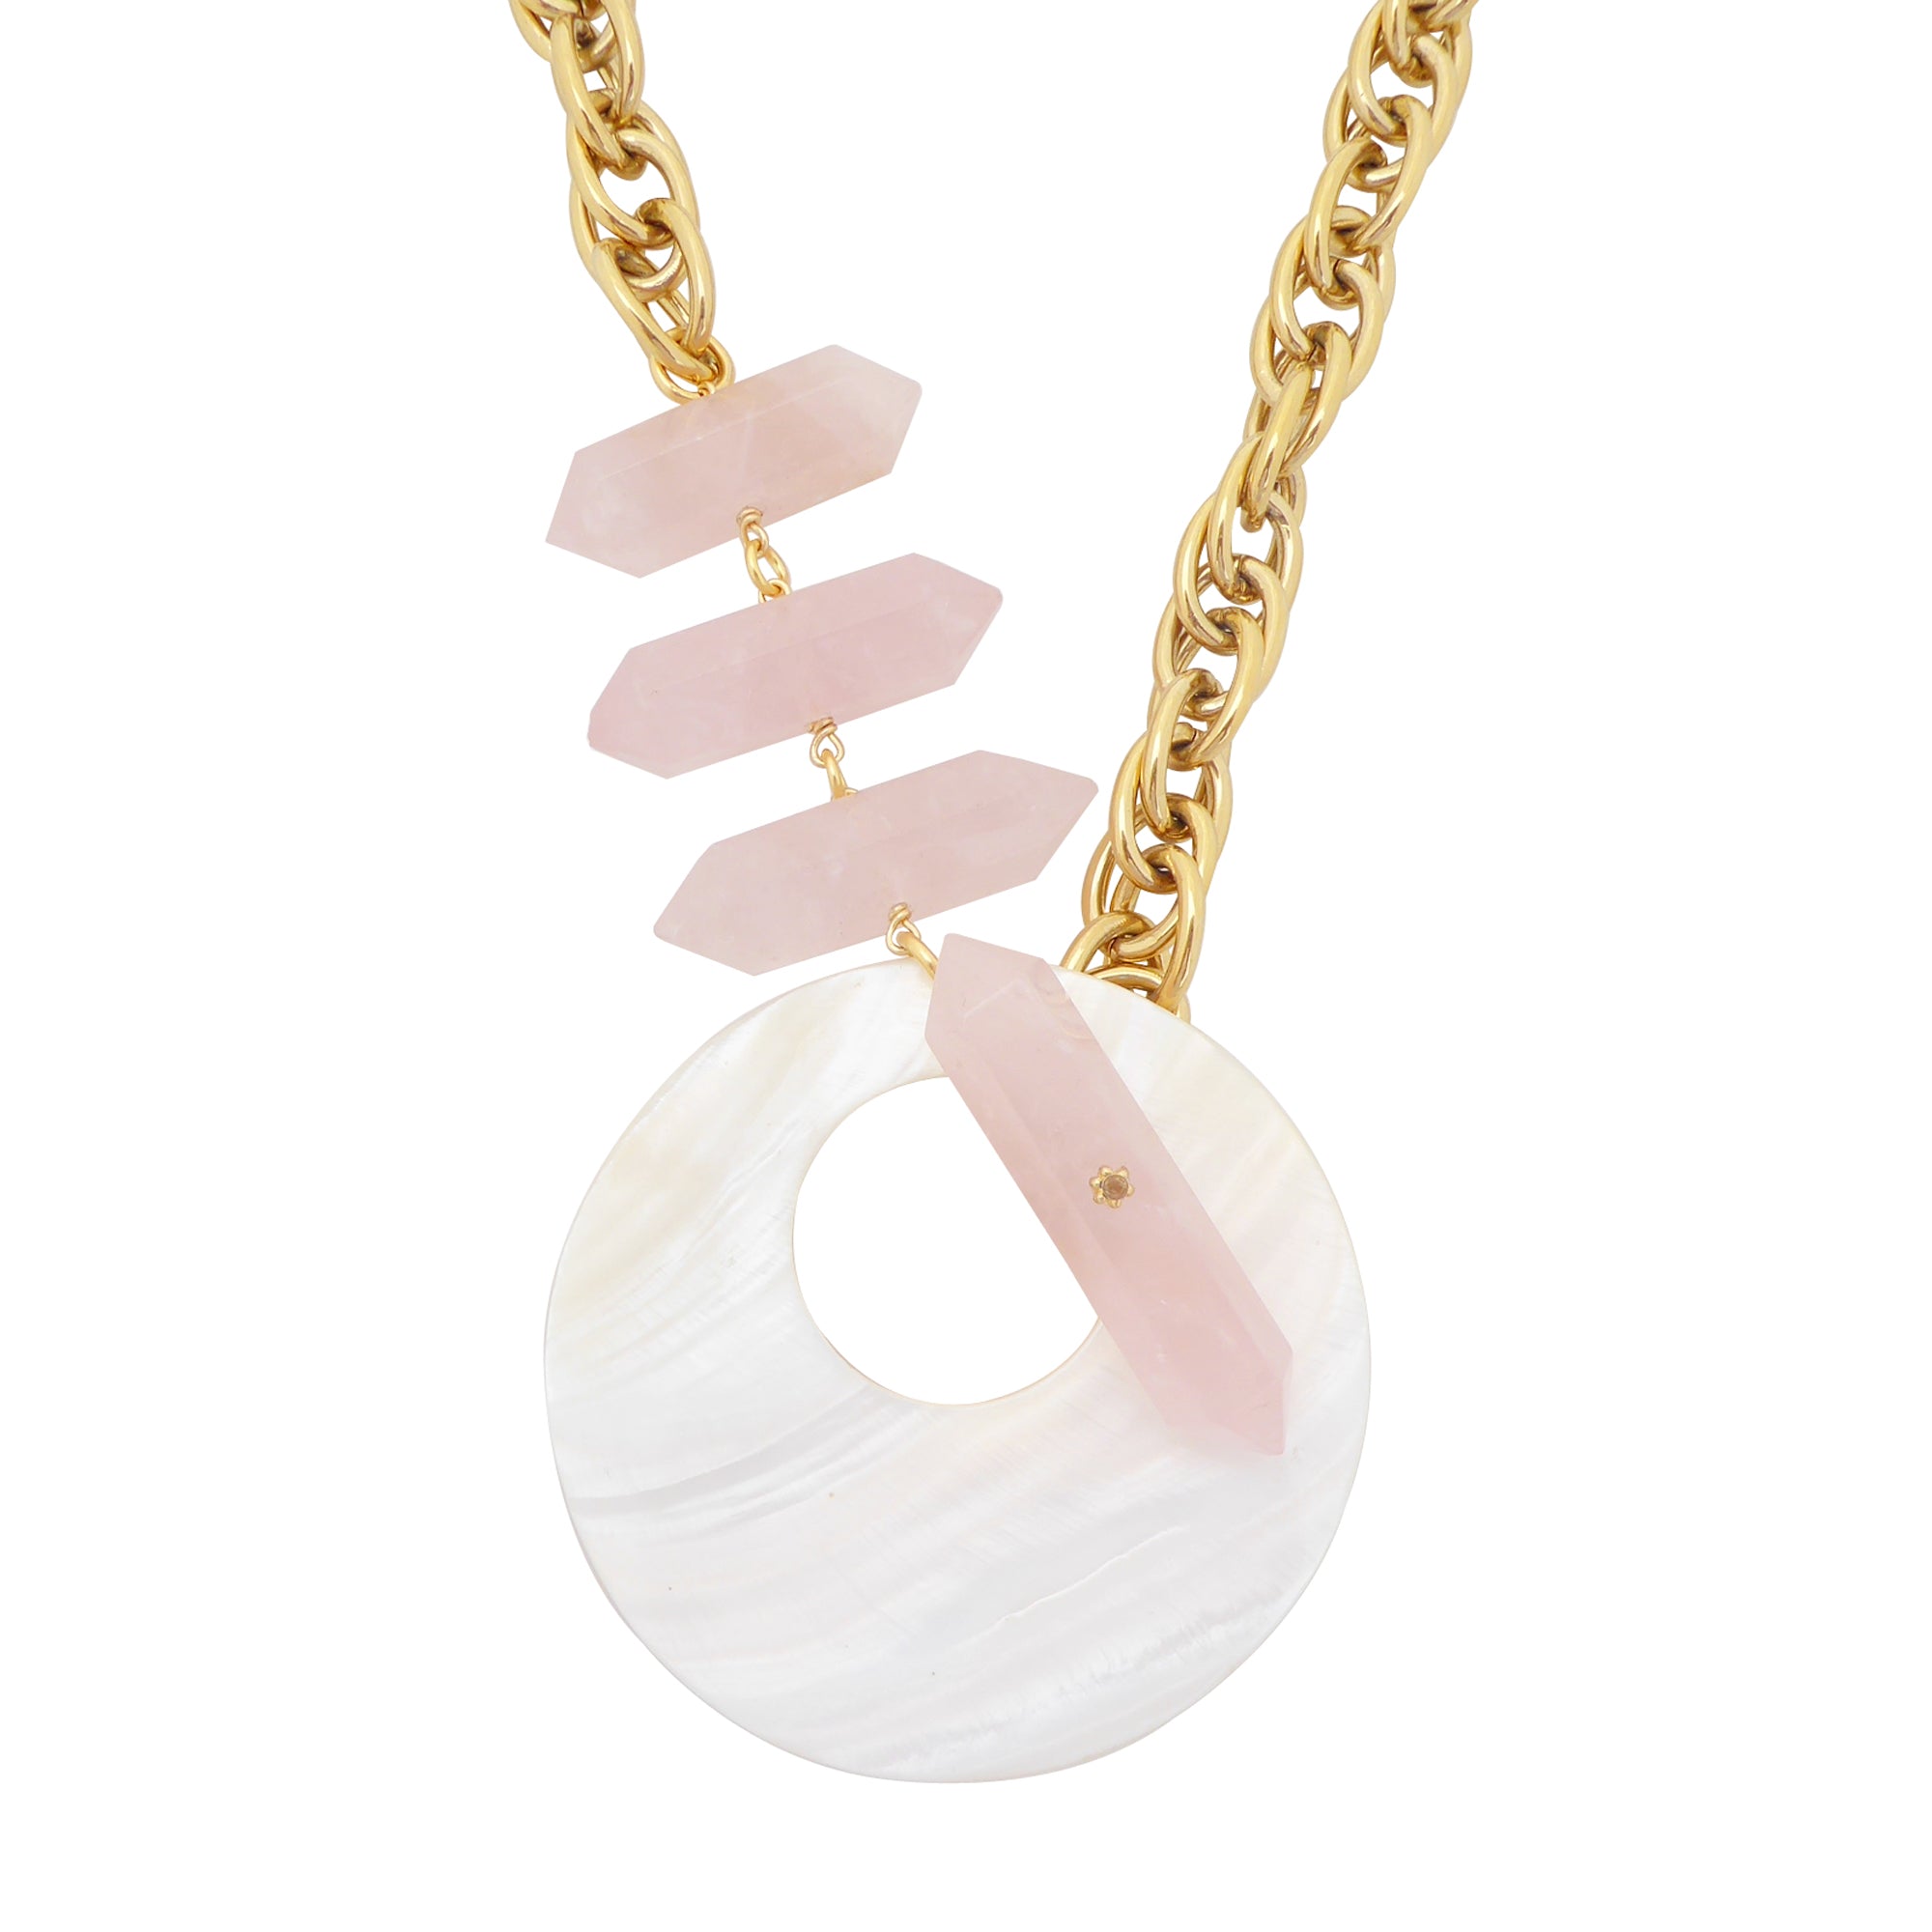 Marna rose quartz and shell necklace by Jenny Dayco 1